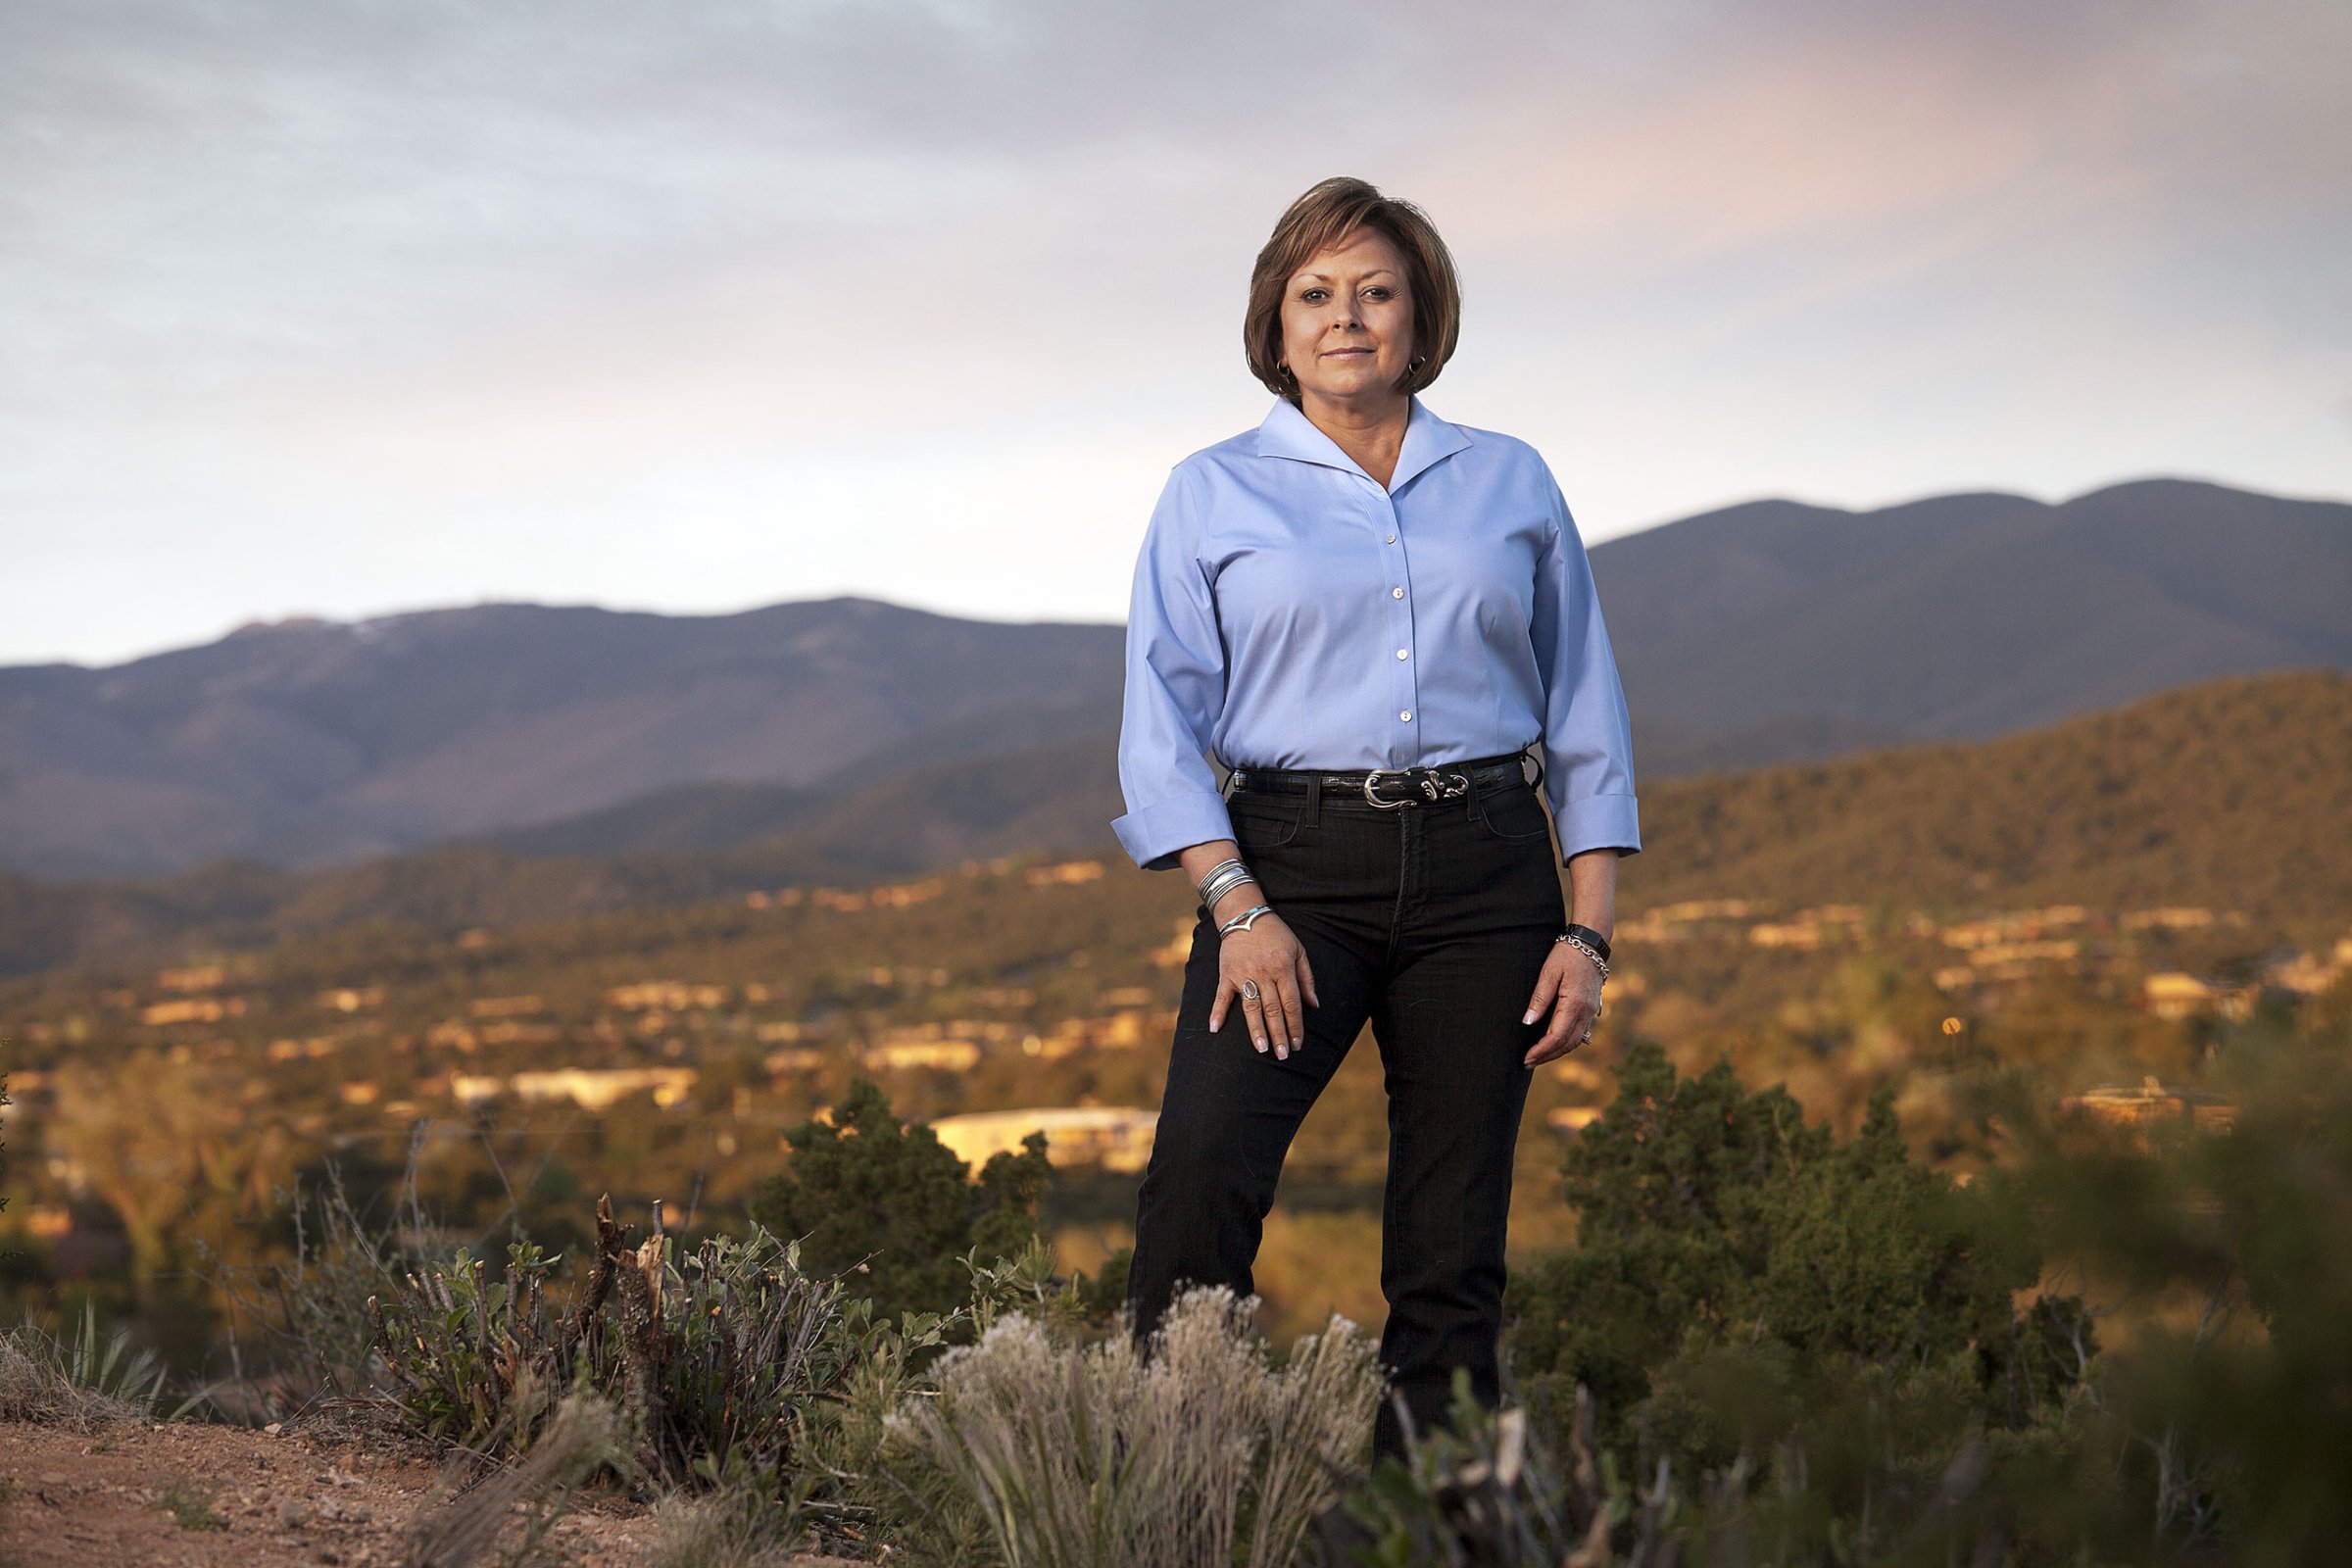 Martinez, the first Latina U.S. governor, made headlines in May when she refused to be “bullied” into supporting Donald Trump